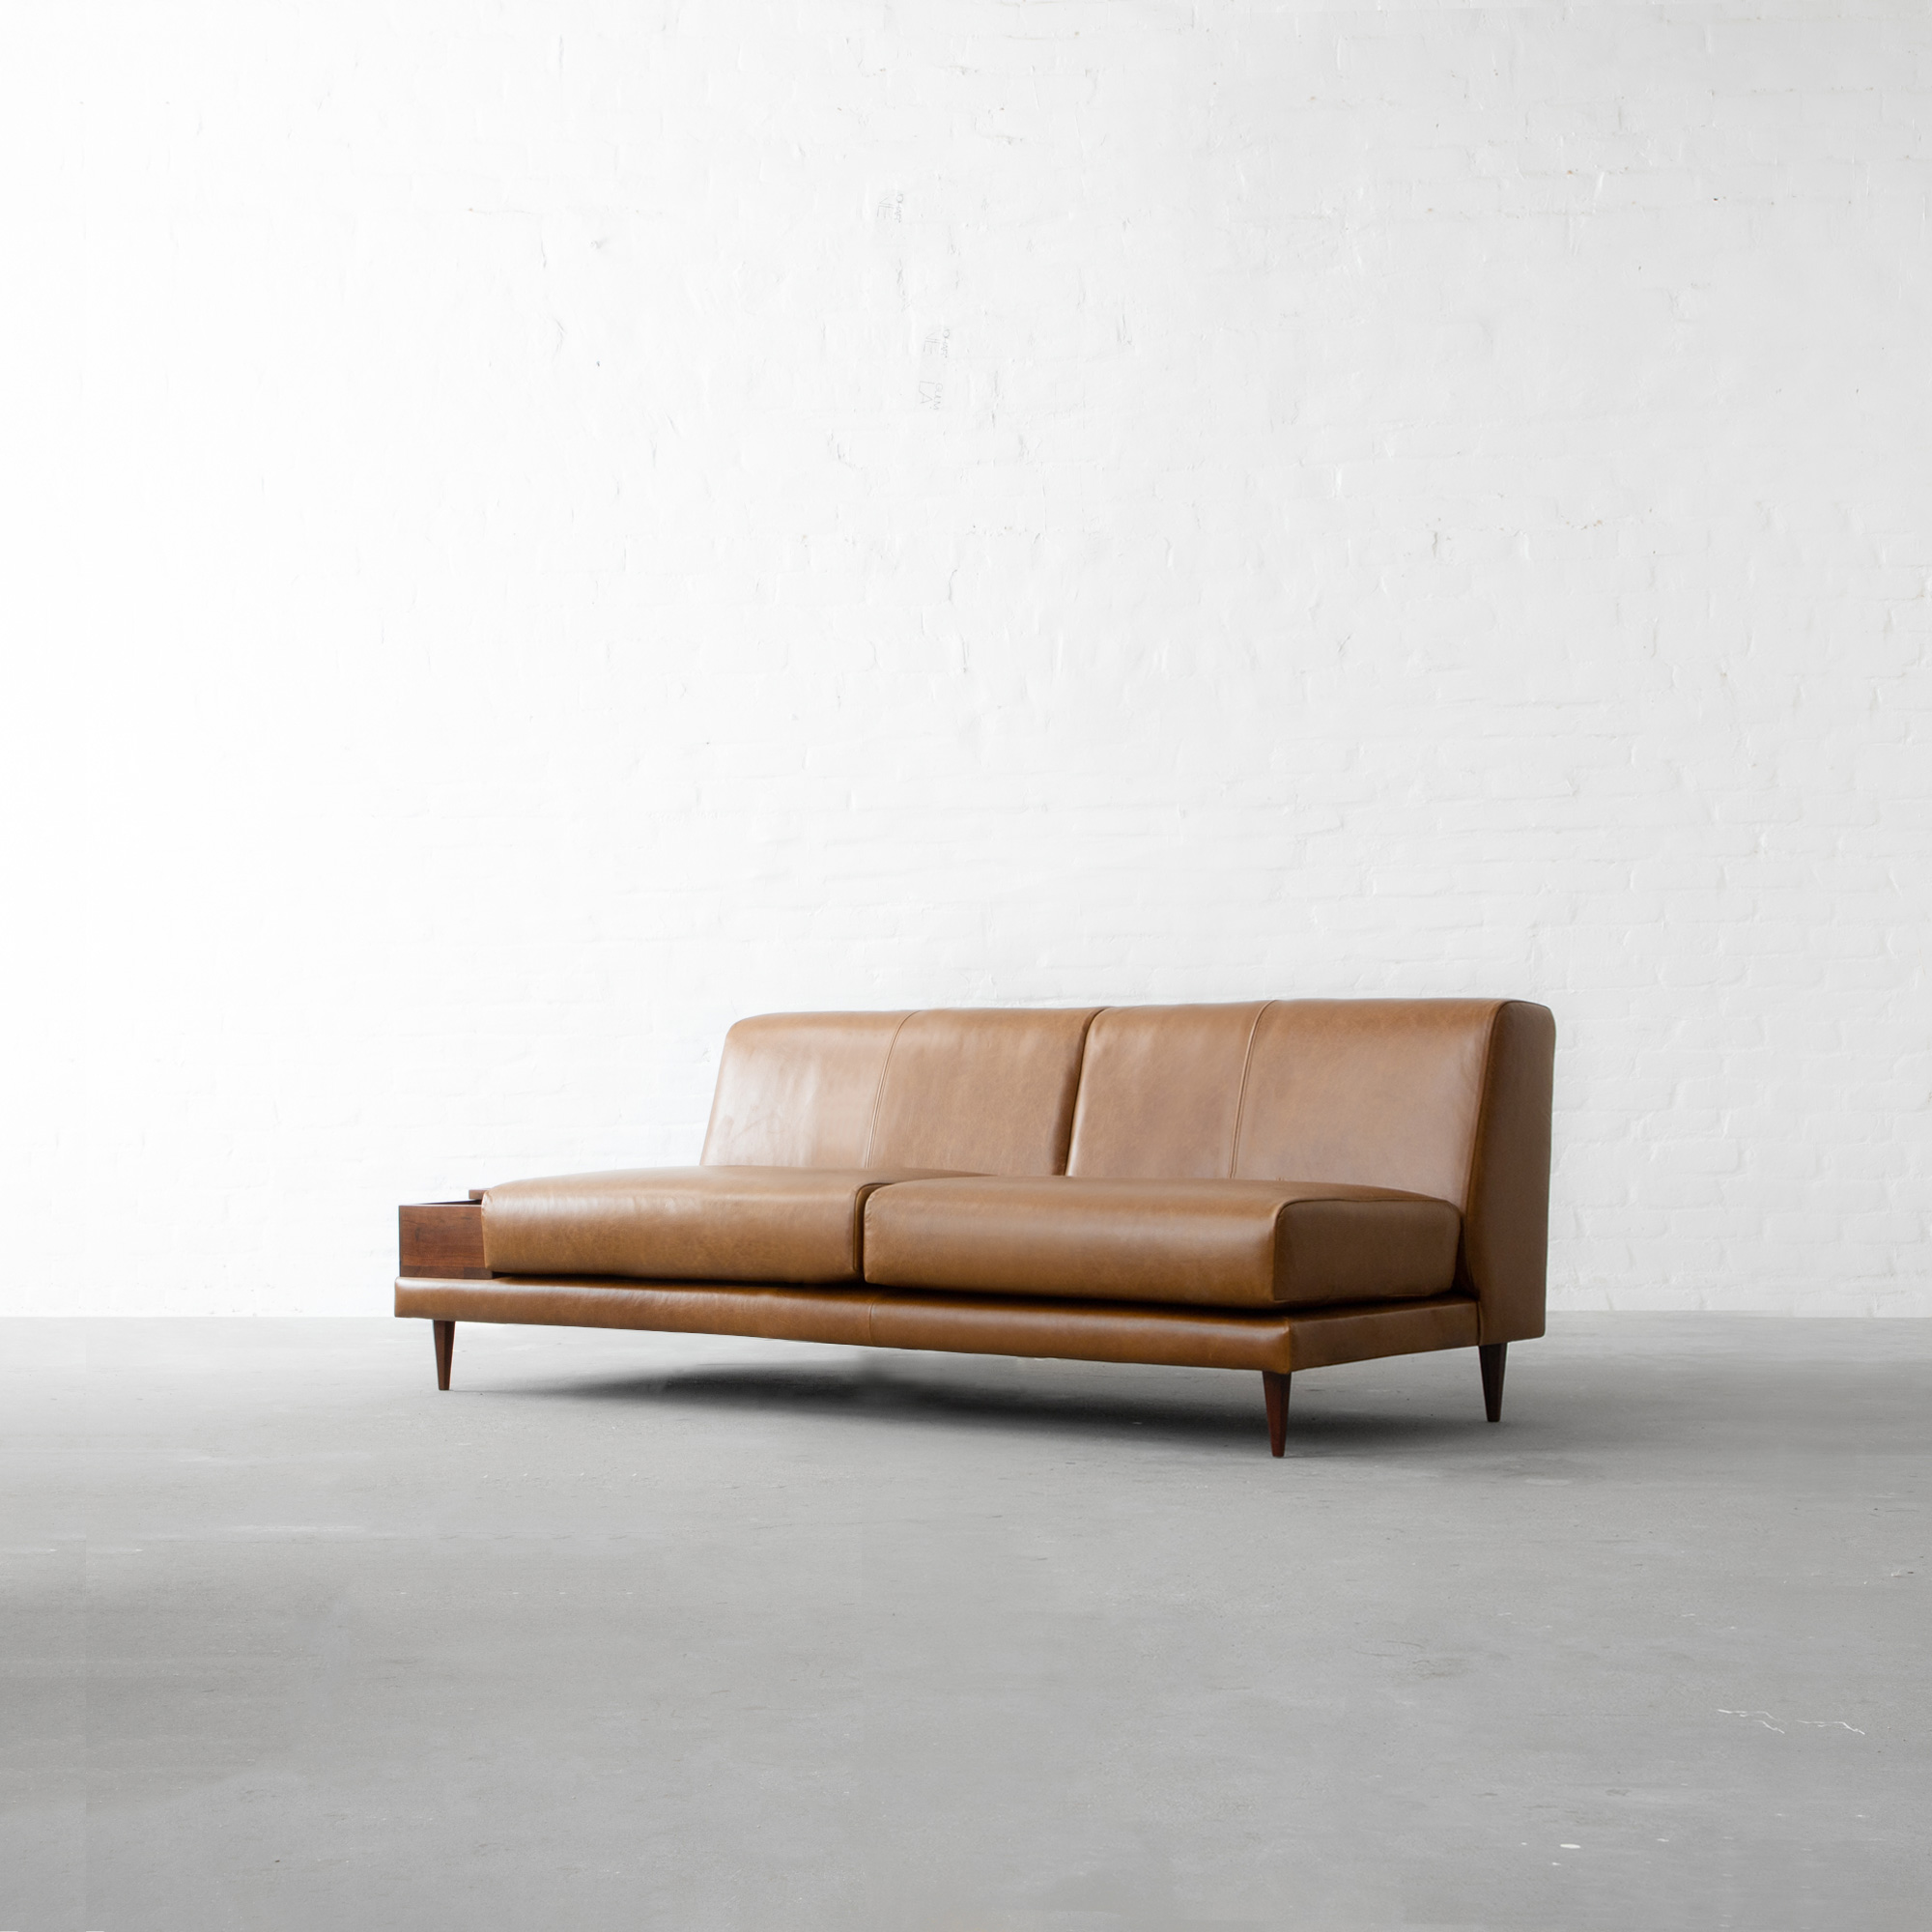 Large Chaise Leather Sectional - Munich